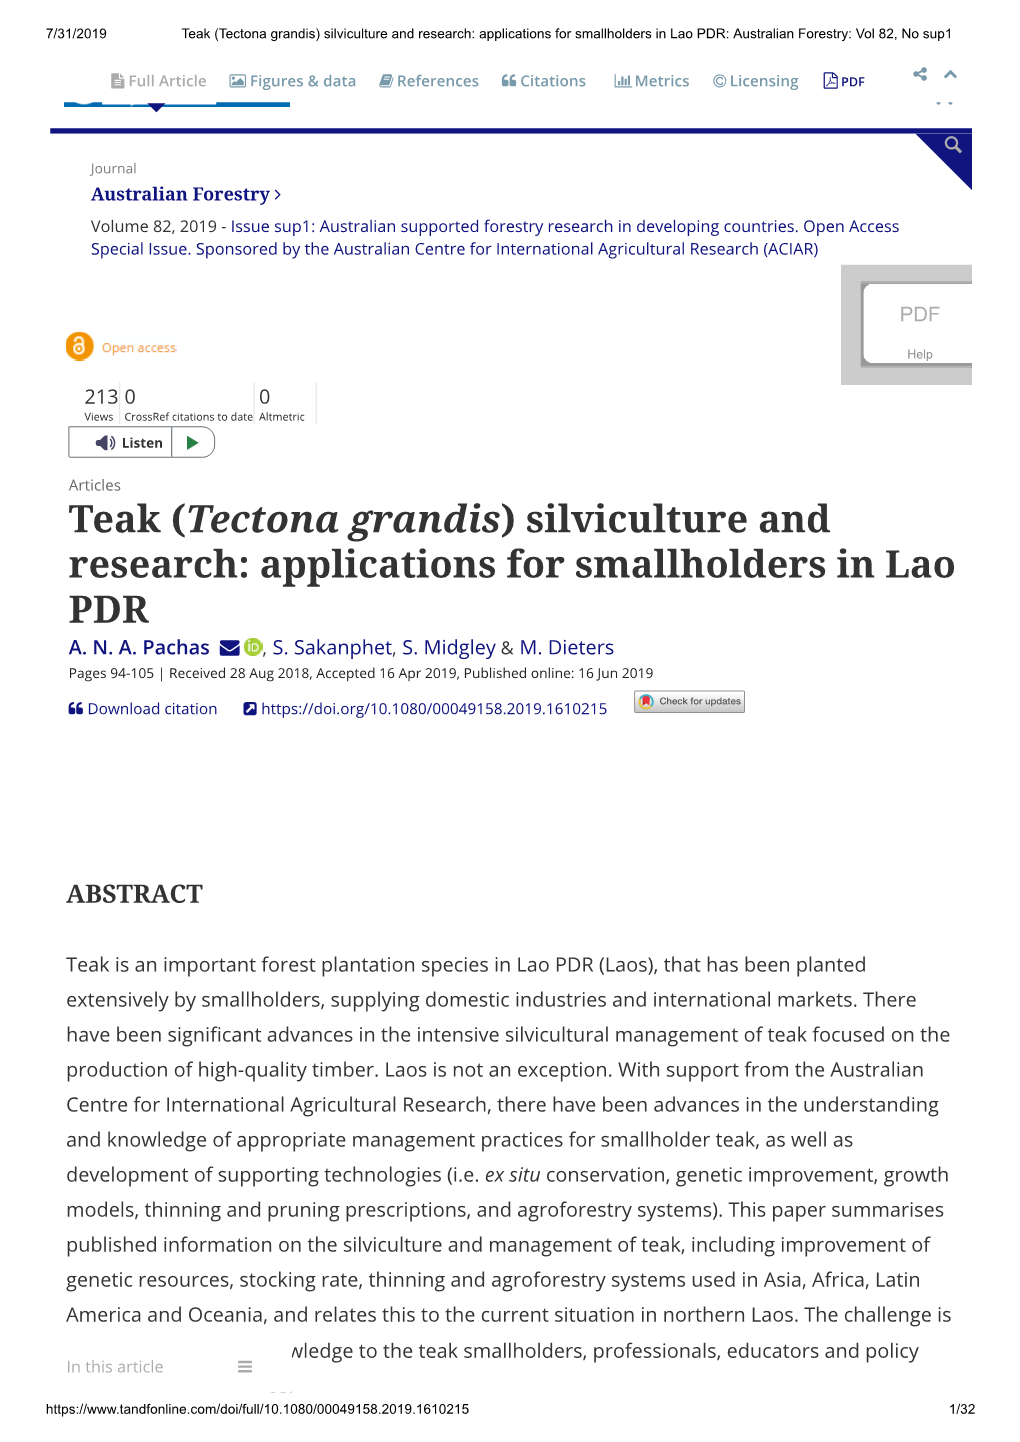 Silviculture and Research: Applications for Smallholders in Lao PDR: Australian Forestry: Vol 82, No Sup1